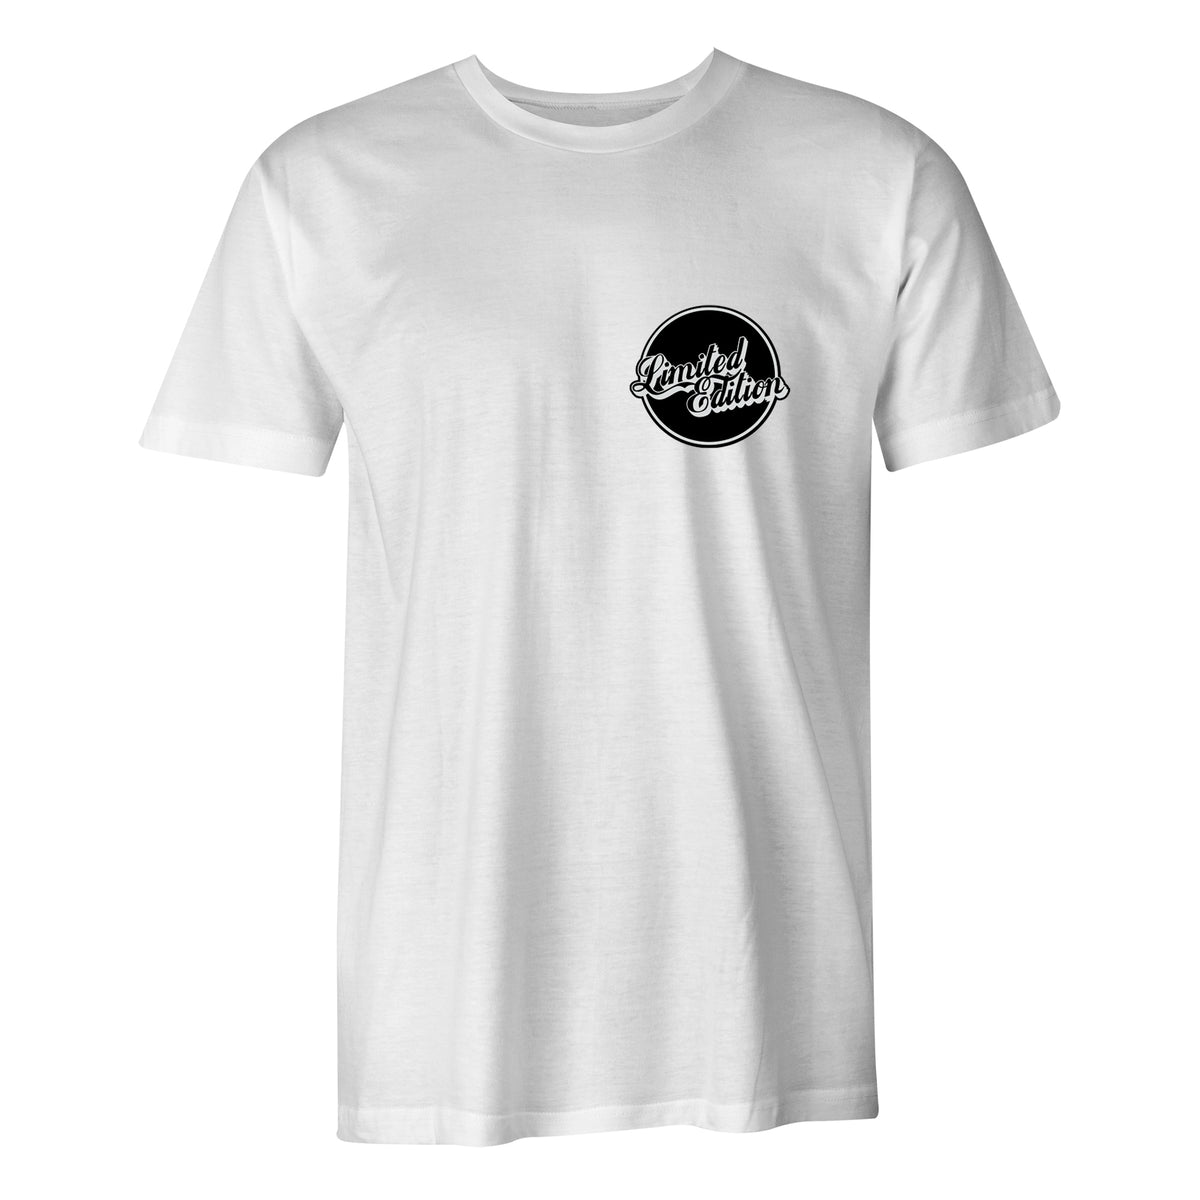 Limited Edition 'Beer Coaster' T-Shirt - White - Nomad Bodyboards